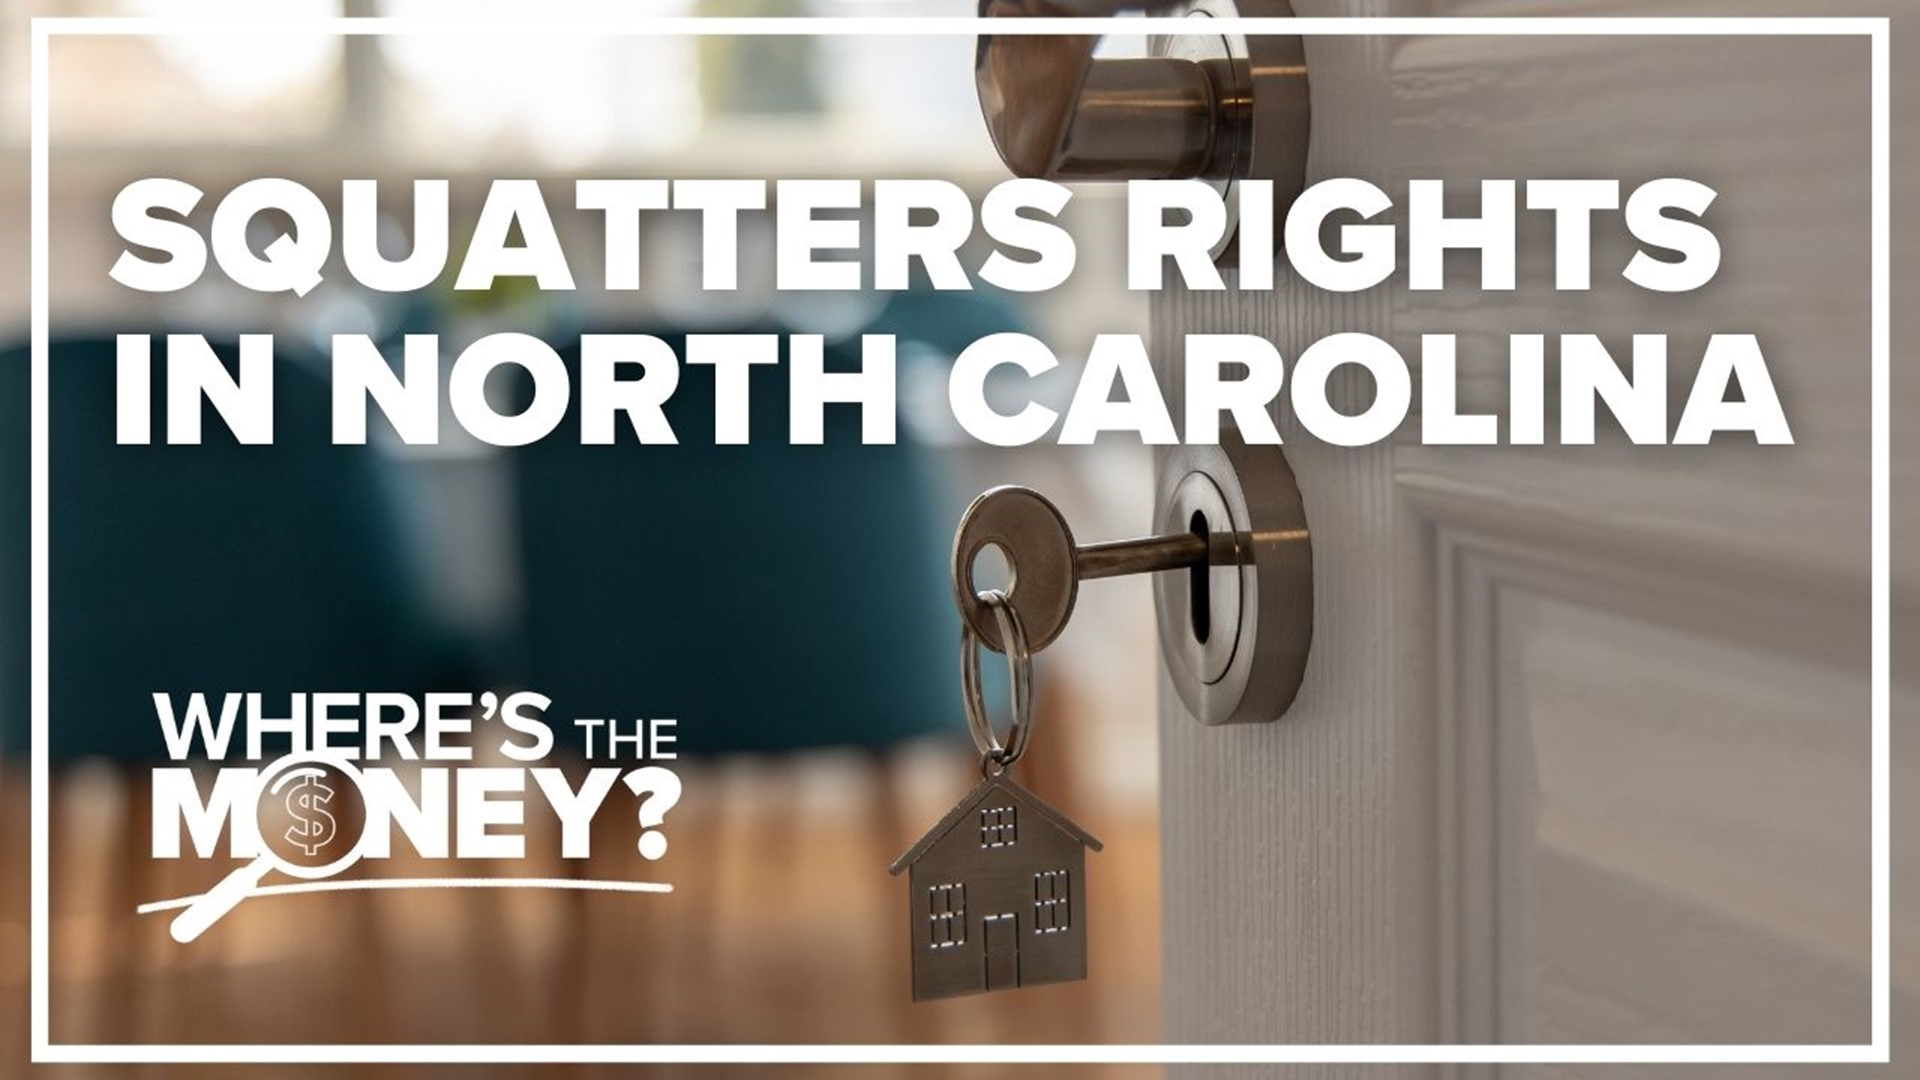 Squatters have rights in North Carolina if they meet certain criteria. Here's how tell the difference in legal squatting versus illegal trespassing.